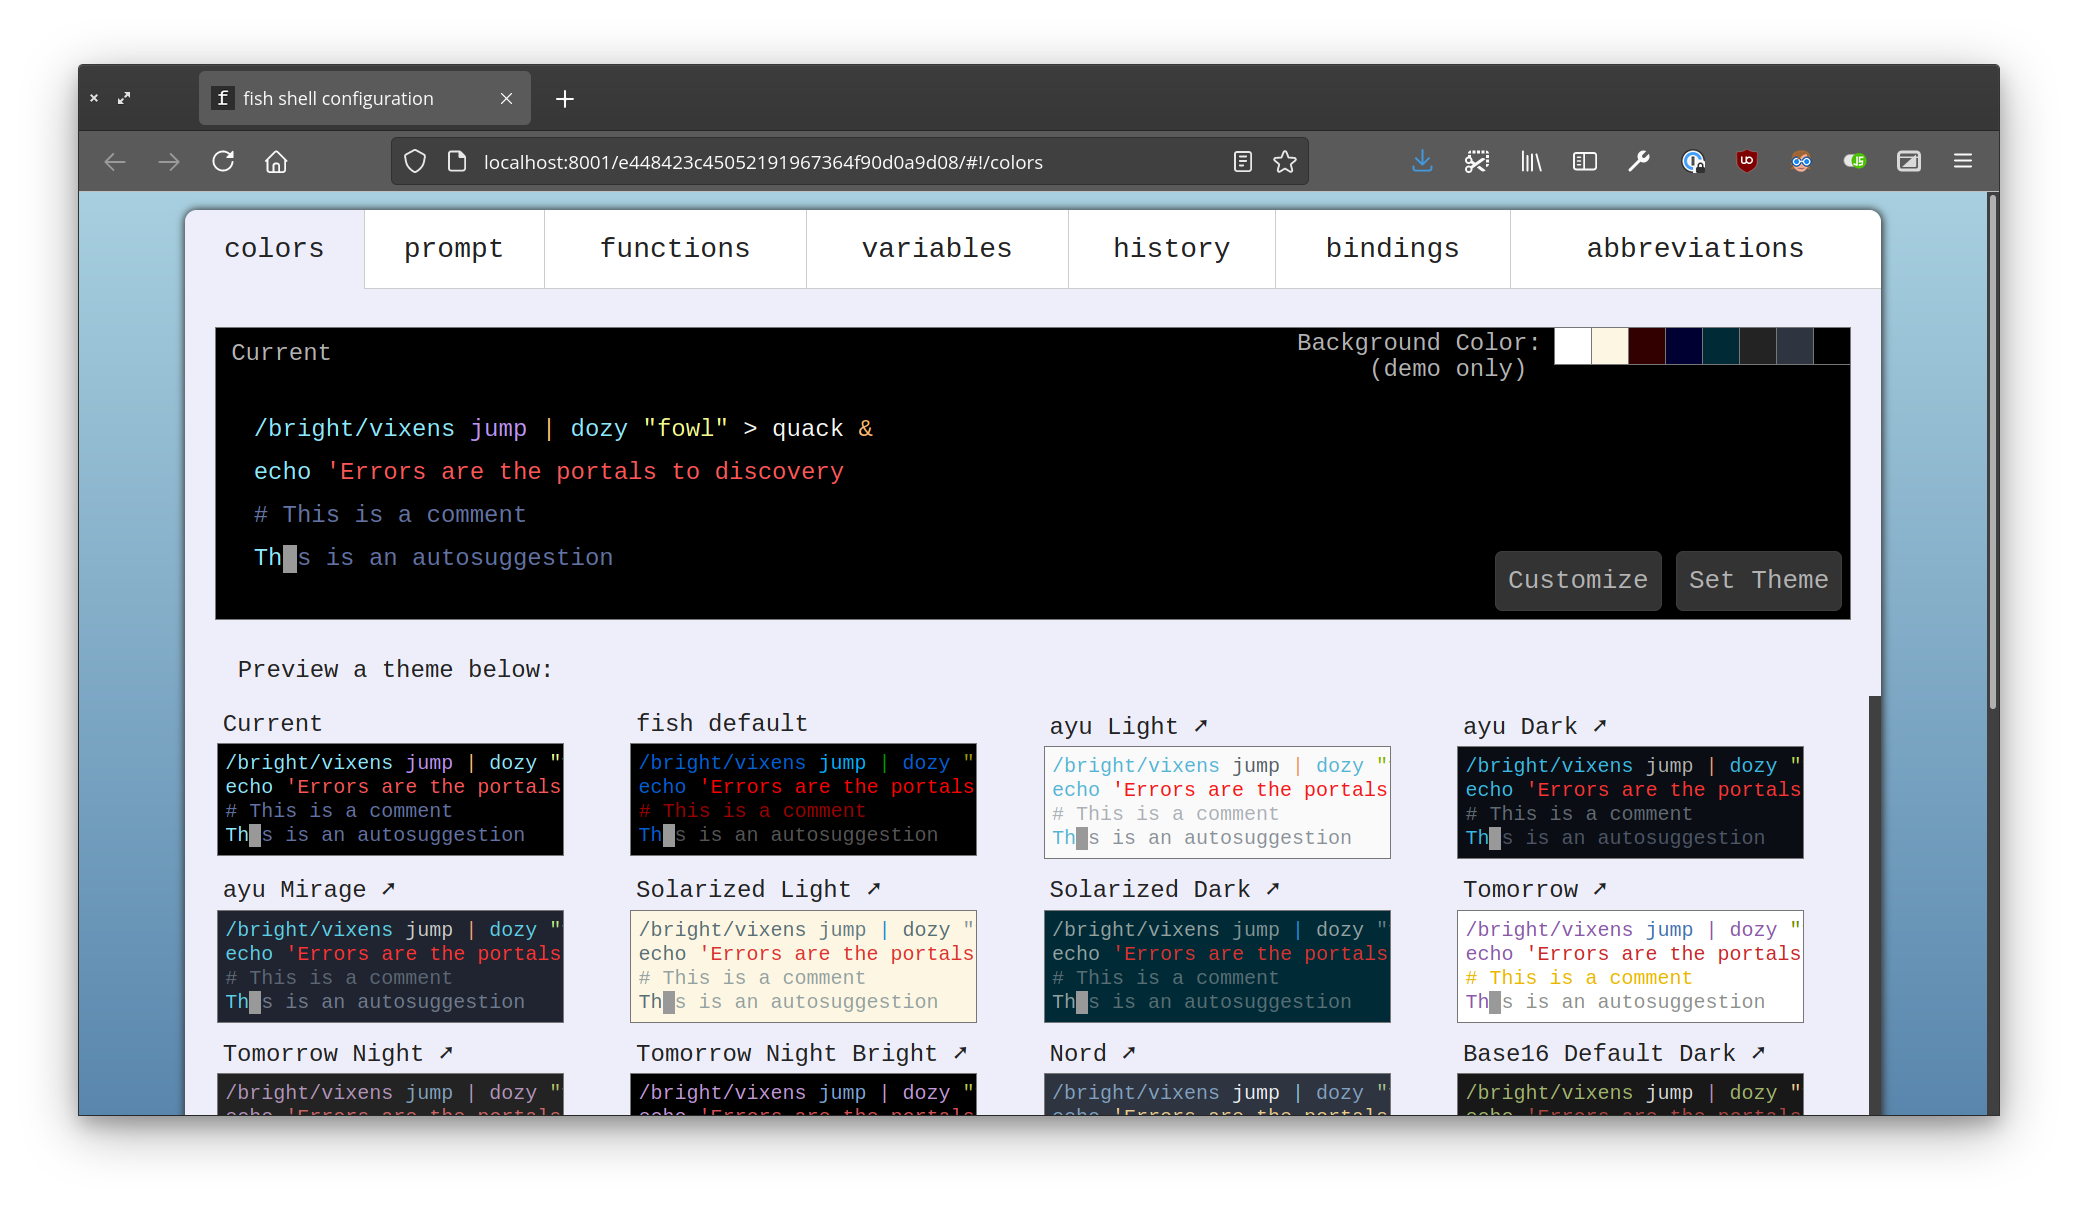 Screenshot of the web interface for fish_config, showing the  colors, prompt, functions, variables, history, bindings, and abbreviations tabs.